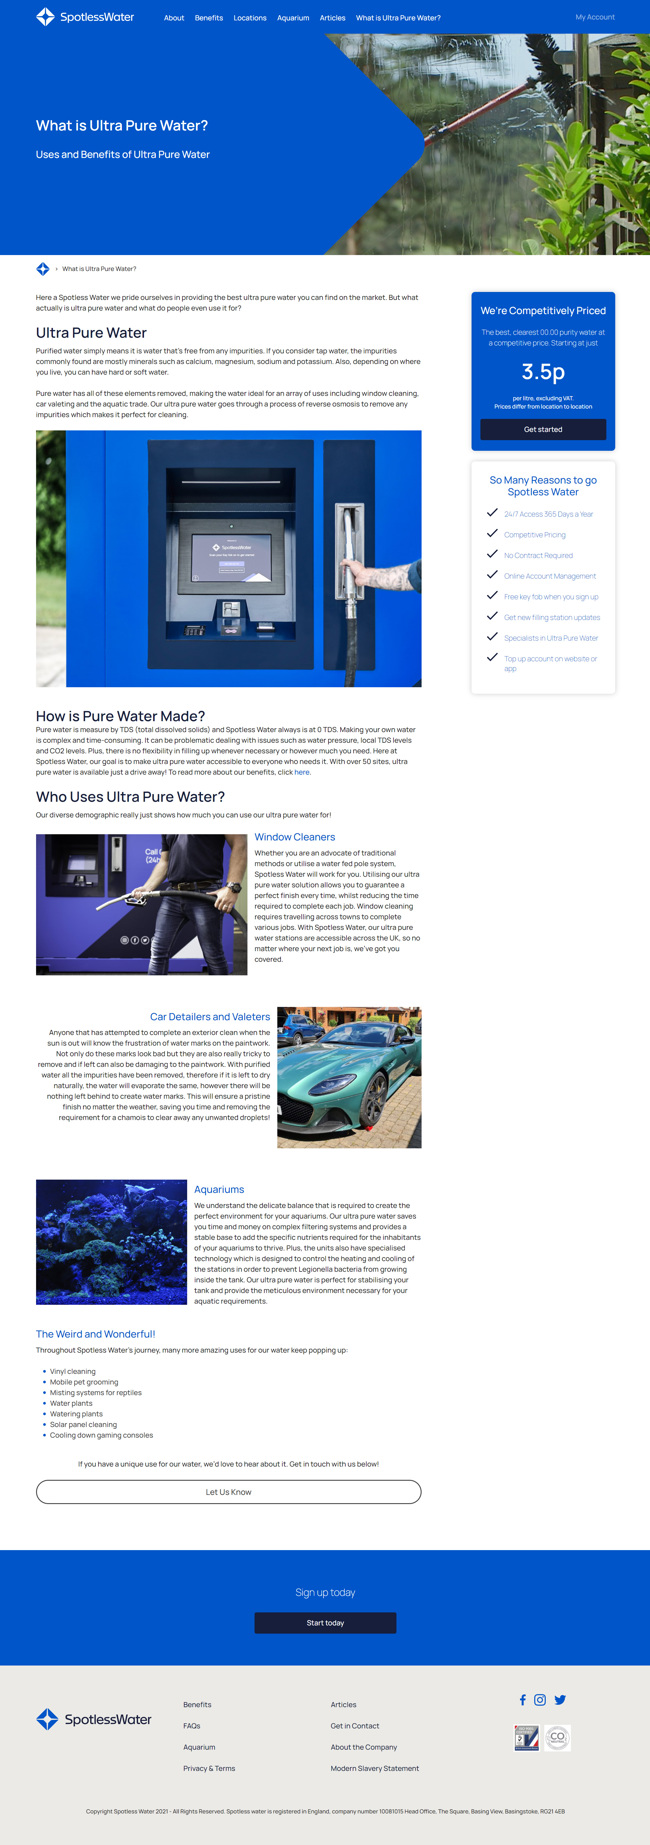 Spotless Water Website Design and WordPress Web Development SP009 What is Ultra Pure Water